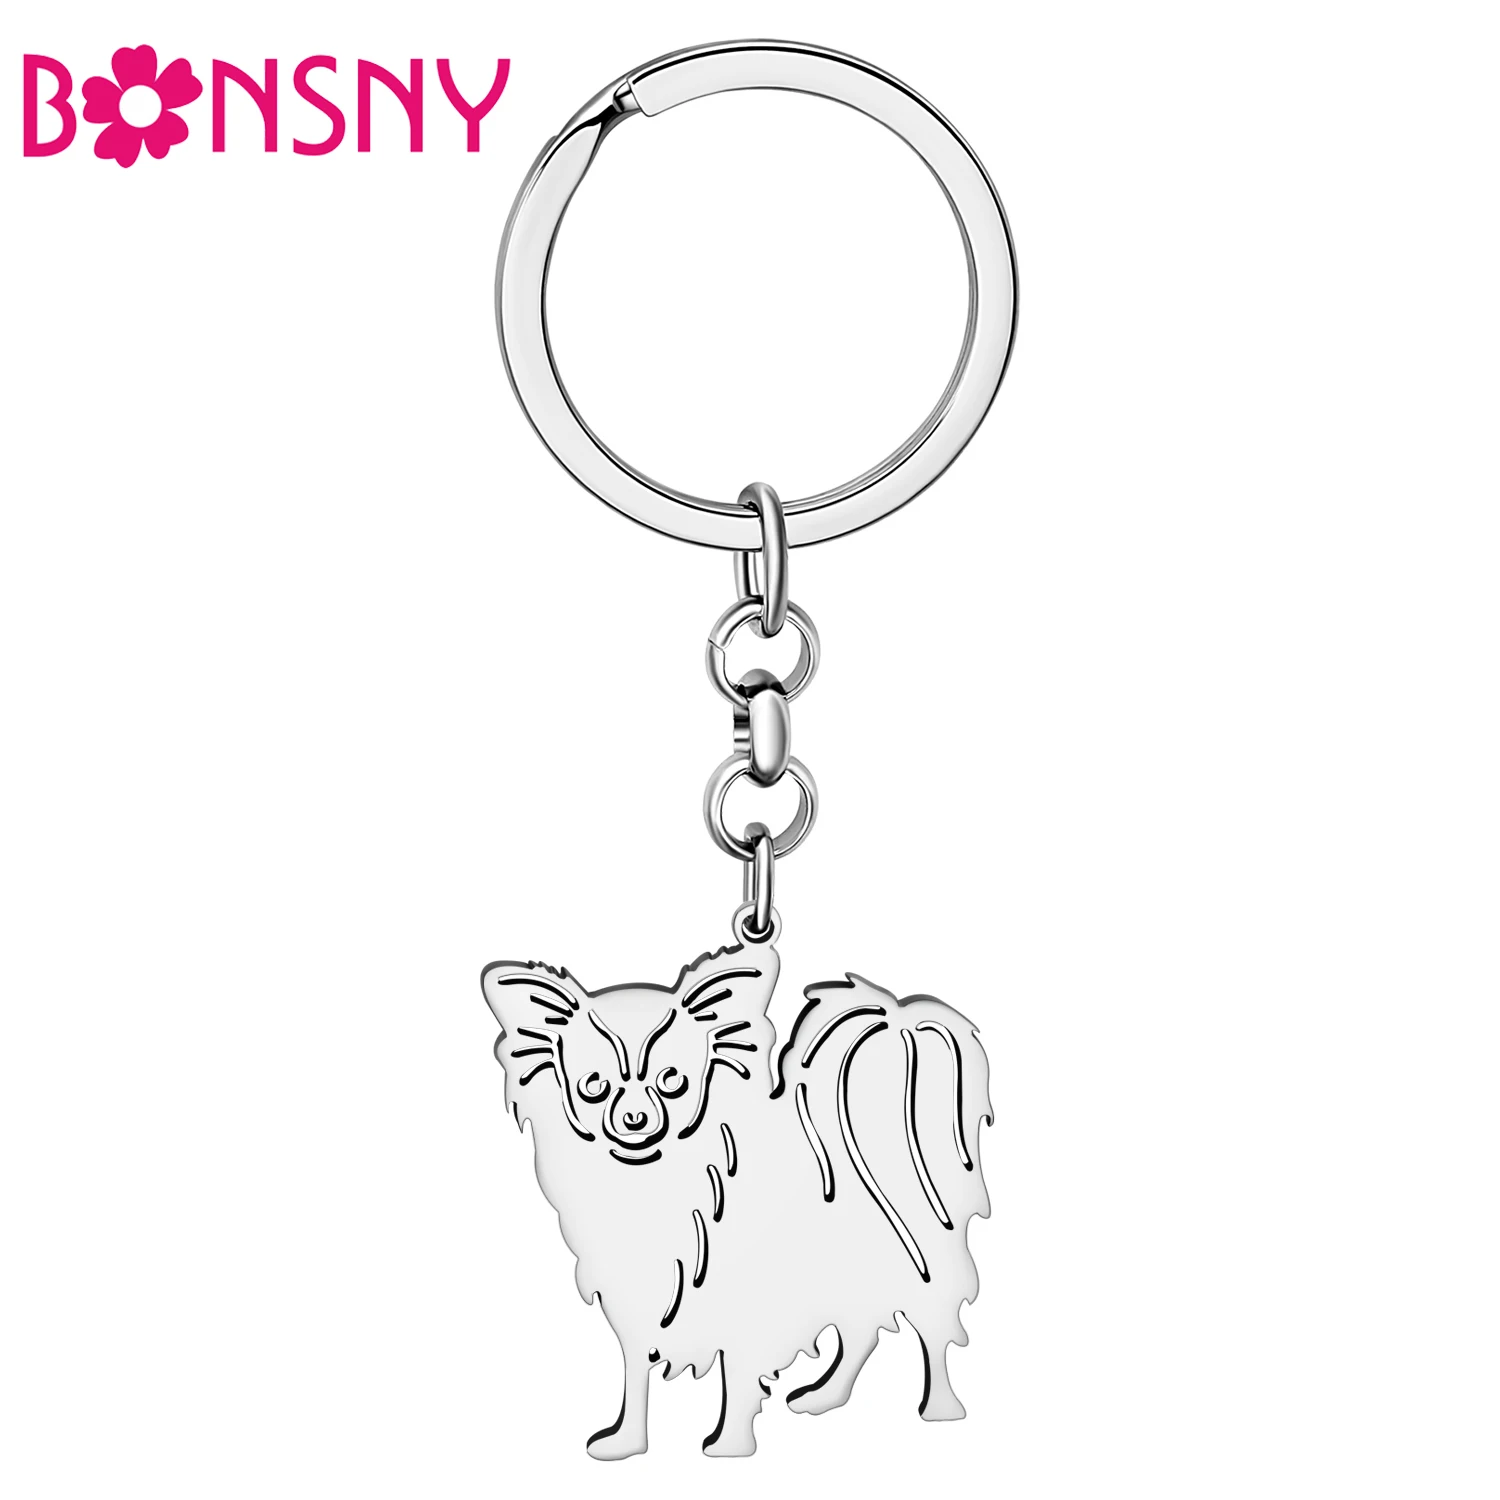 

Bonsny Stainless Steel Silver-plated Cute Papillon Dog Keychains Pet Animals Key Chains Keyring For Women Gifts Wallets Charms